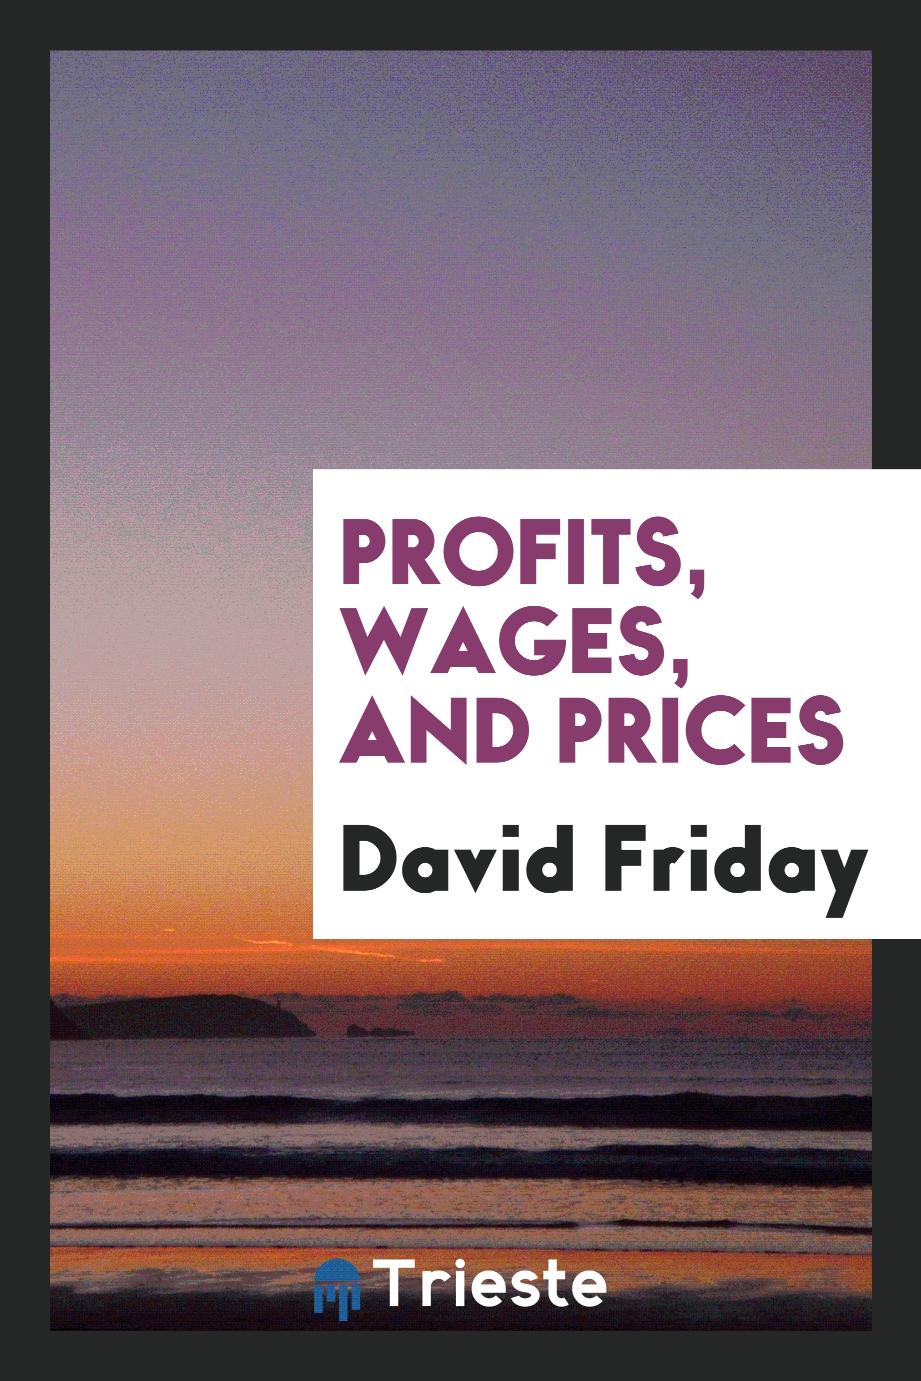 Profits, wages, and prices